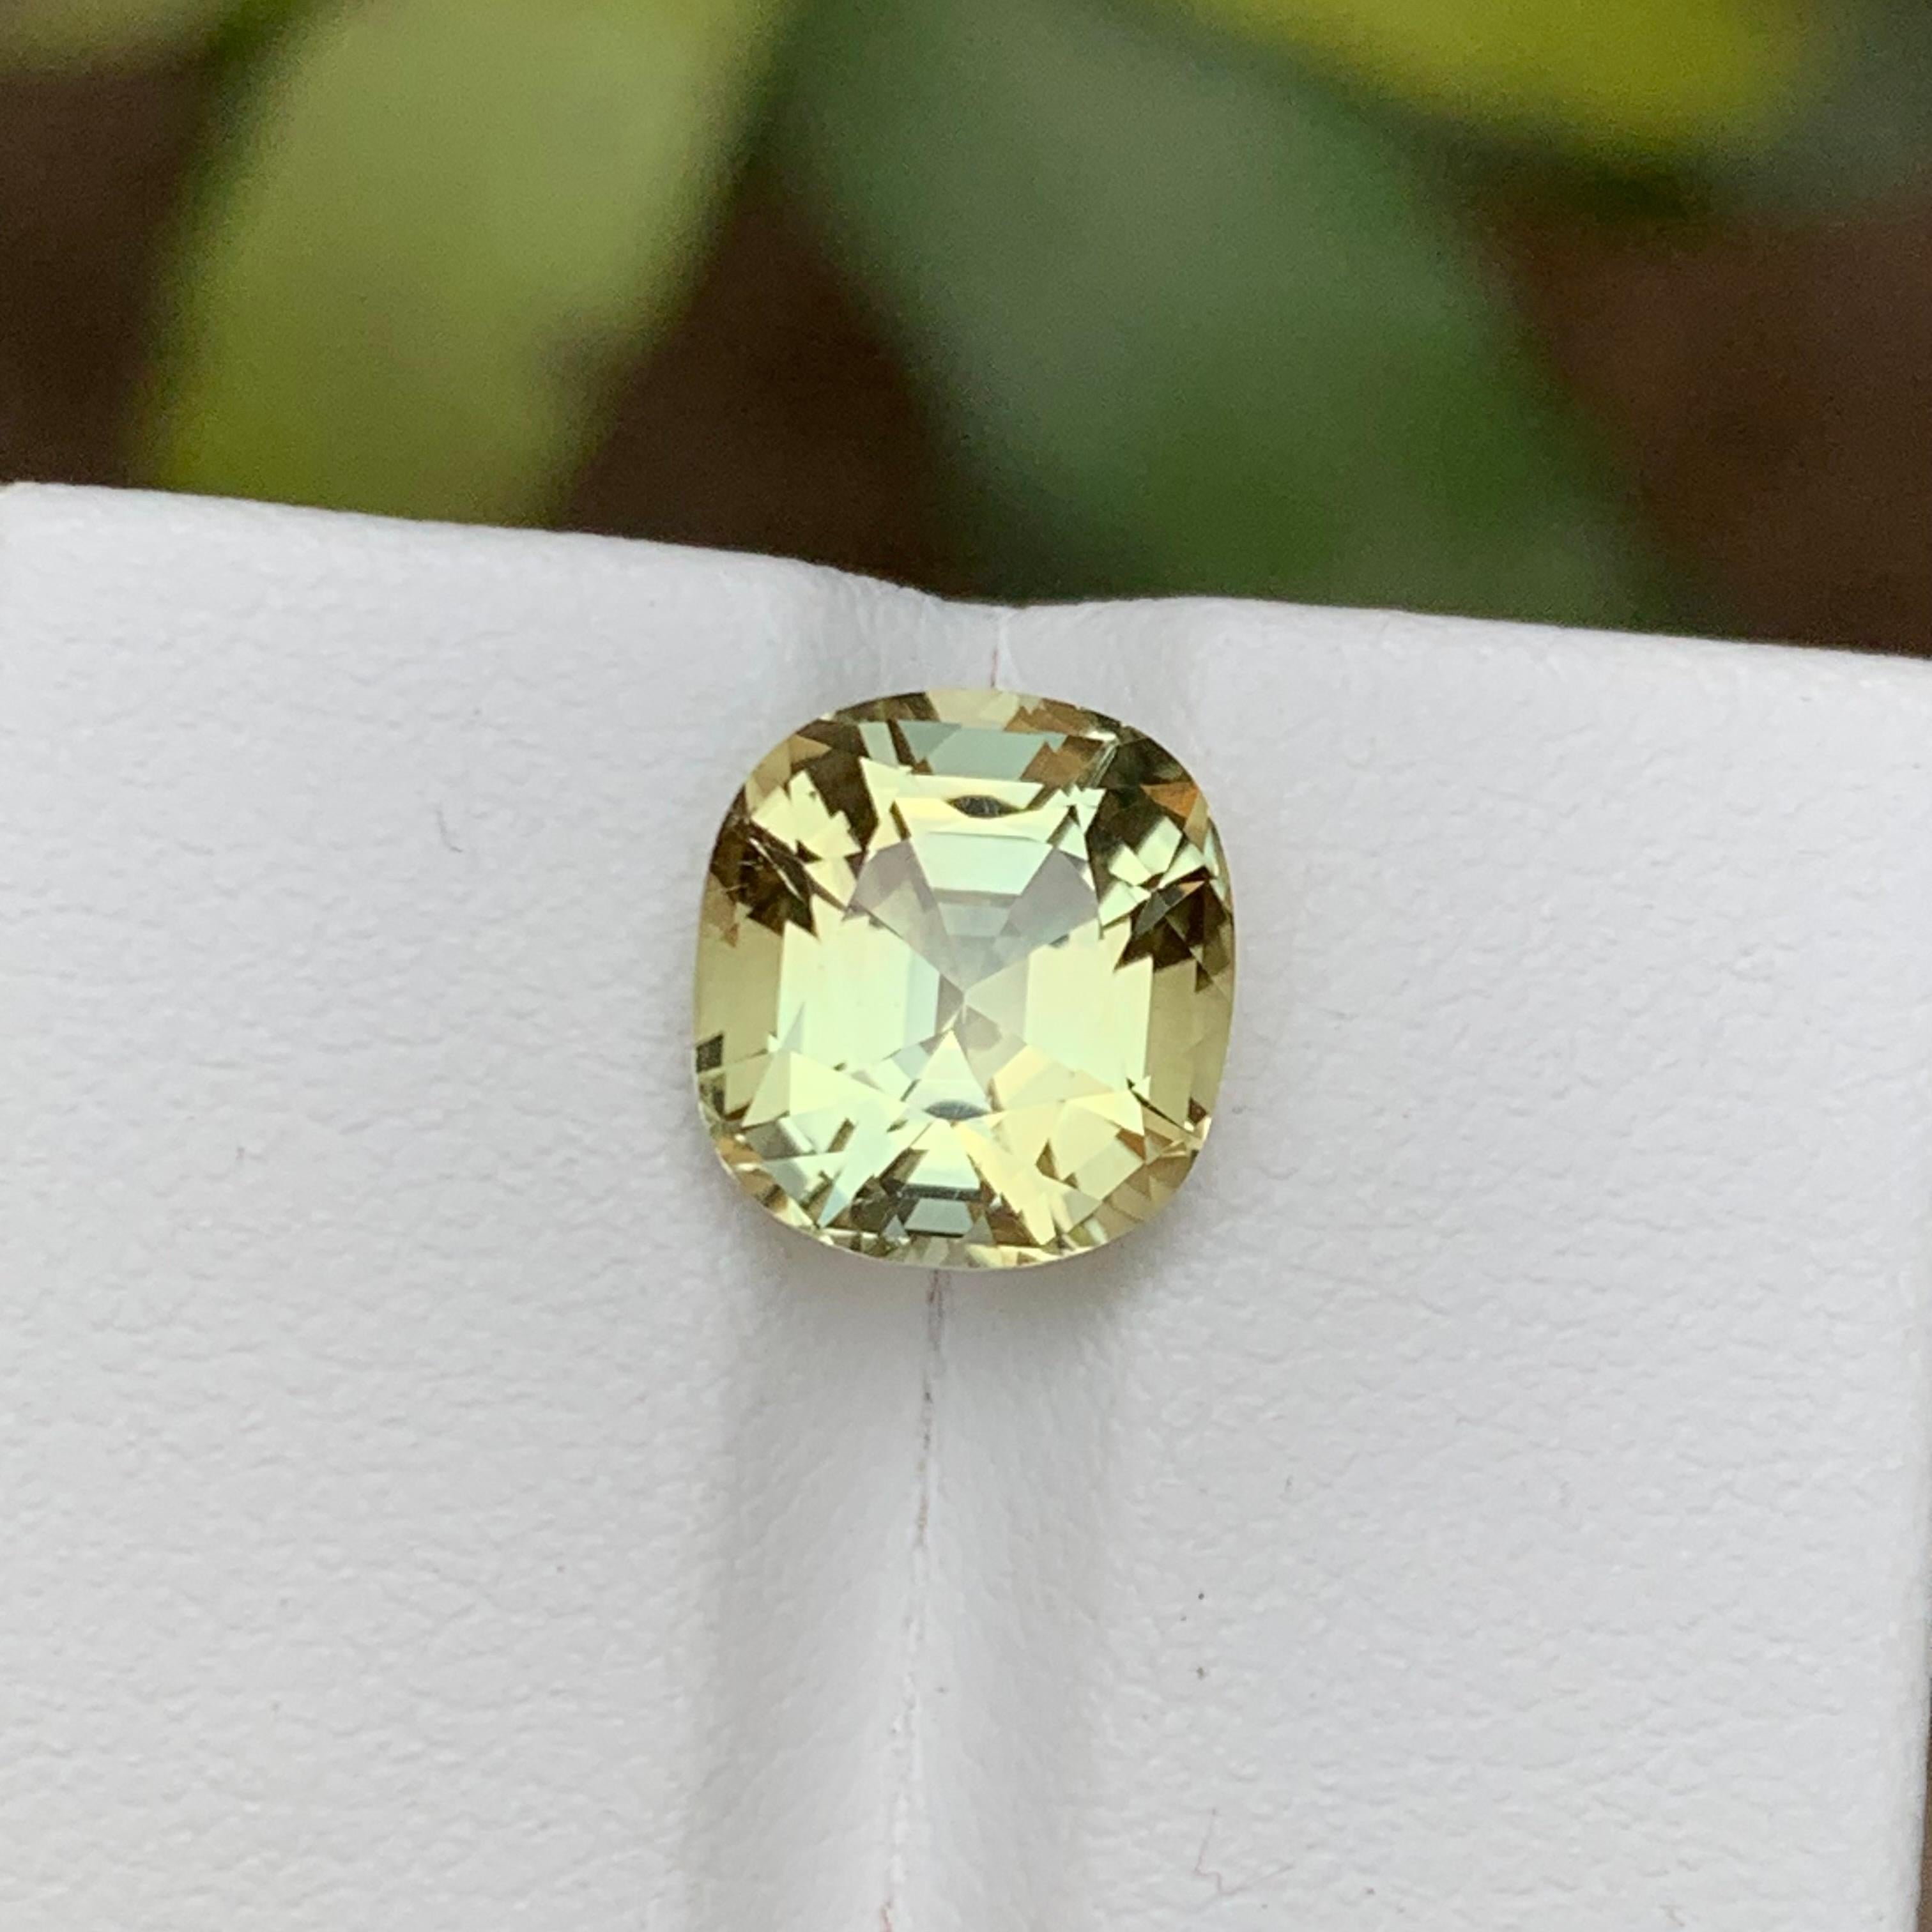 Rare Light Golden Yellow Natural Tourmaline Gemstone 4.15Ct Cushion Cut for Ring For Sale 1